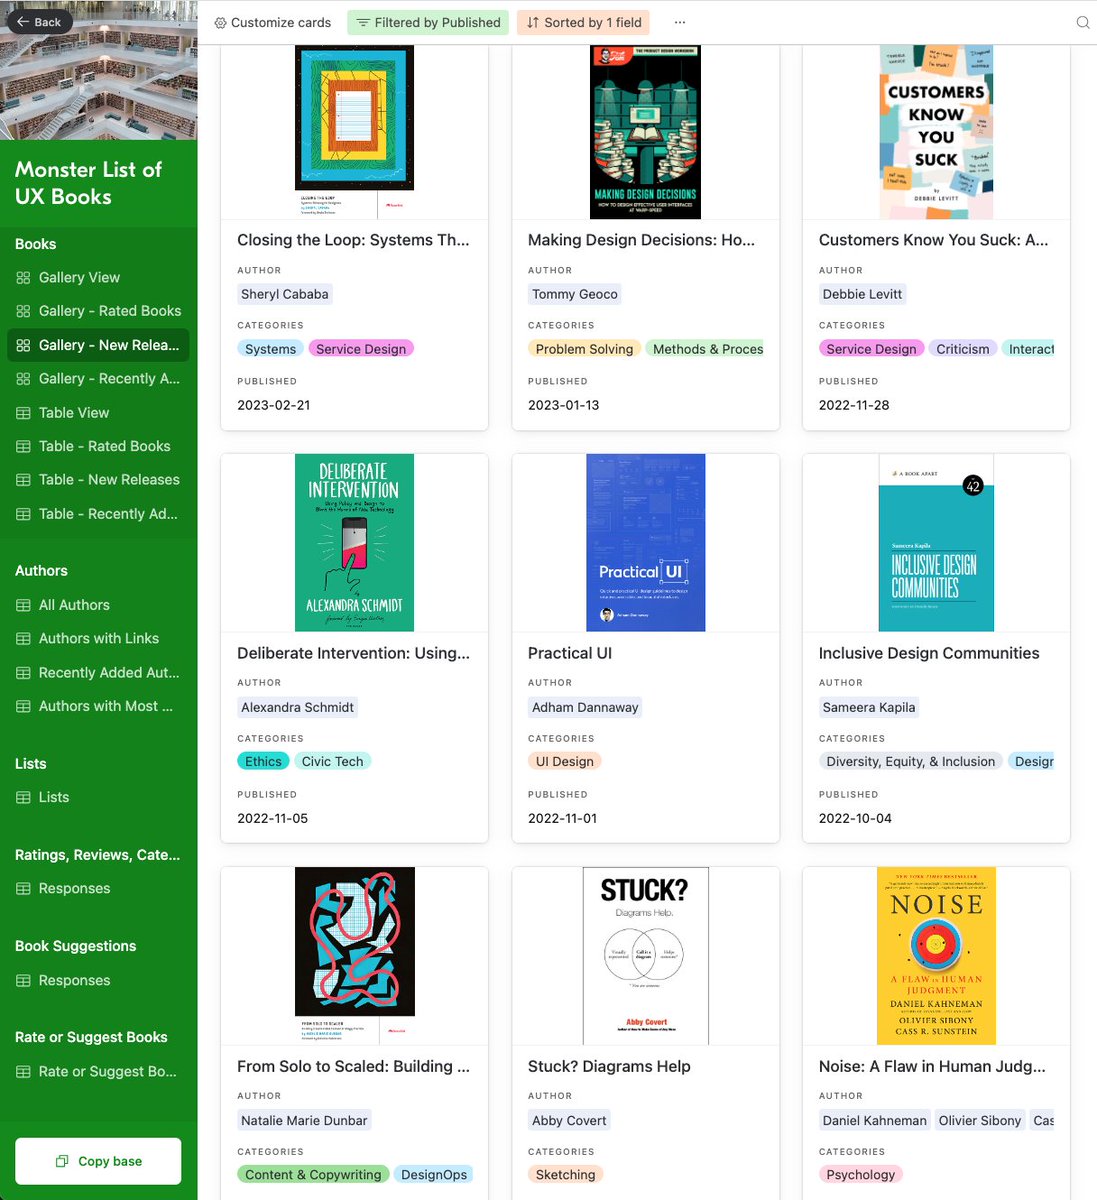 📚 Monster list of UX books

If you're looking for a read, you're sure to find one on this massive list 🤯

Sort by top rated or new releases.

Curated by @thischrisoliver

Link below 👇

#design #uxui #uxdesign #ux #uxbooks